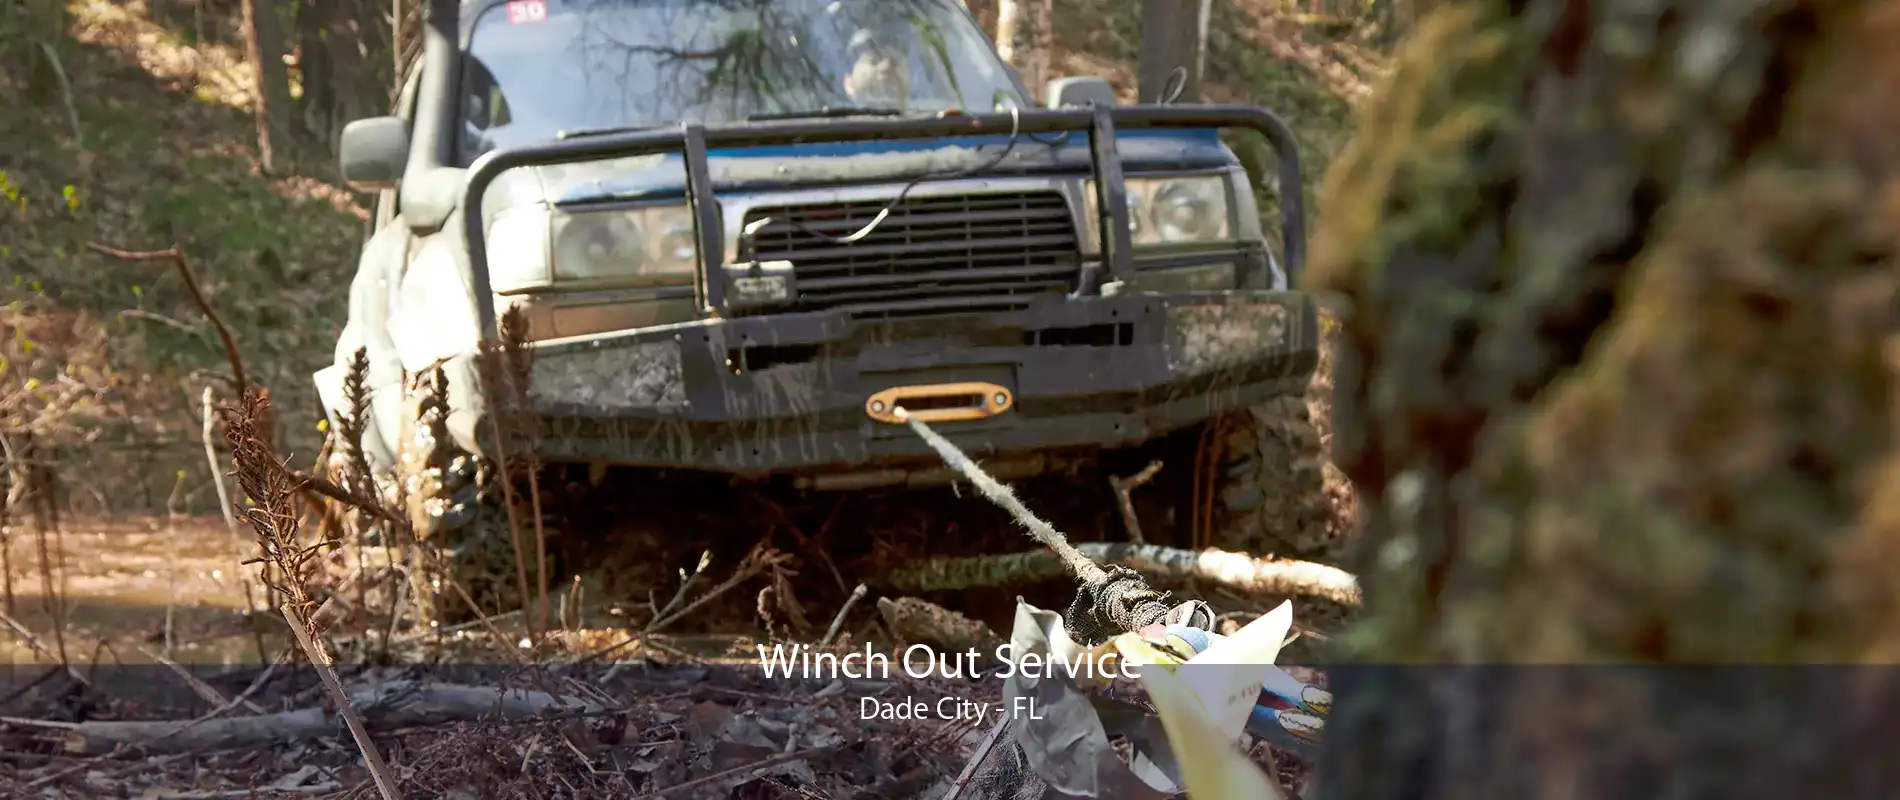 Winch Out Service Dade City - FL